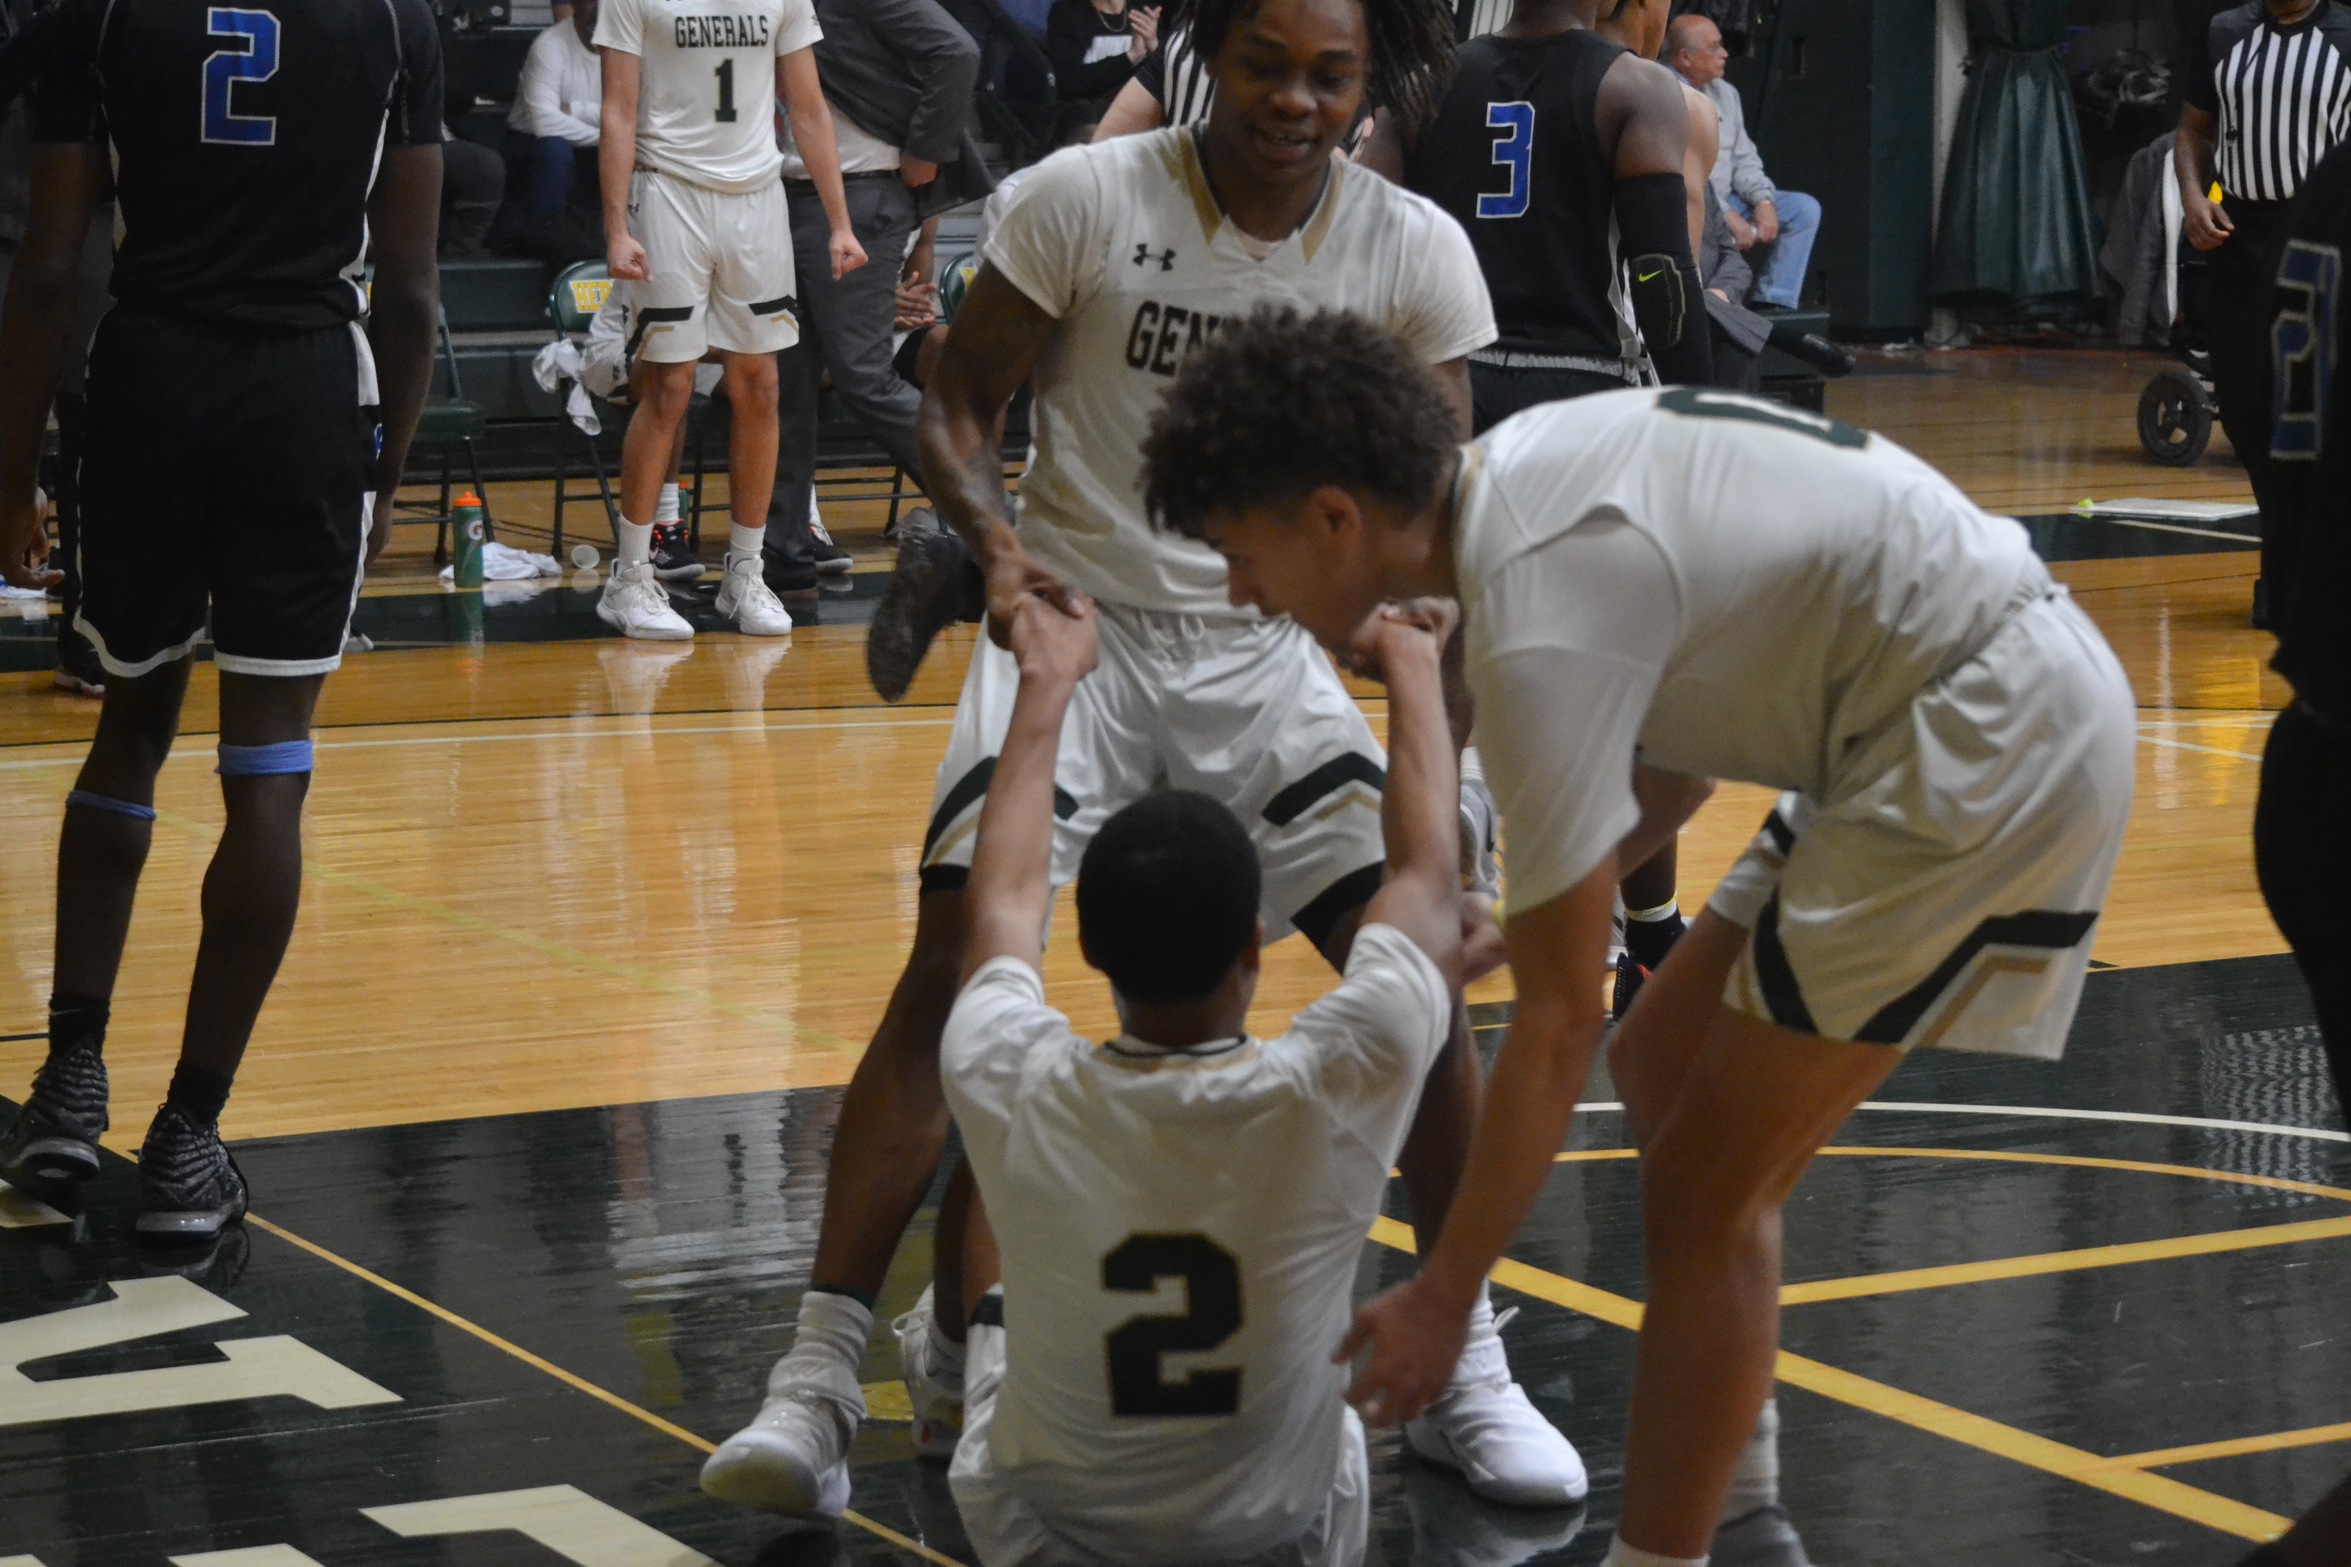 GENERALS ADVANCE TO REGION III FINAL FOUR FOR 11TH STRAIGHT YEAR